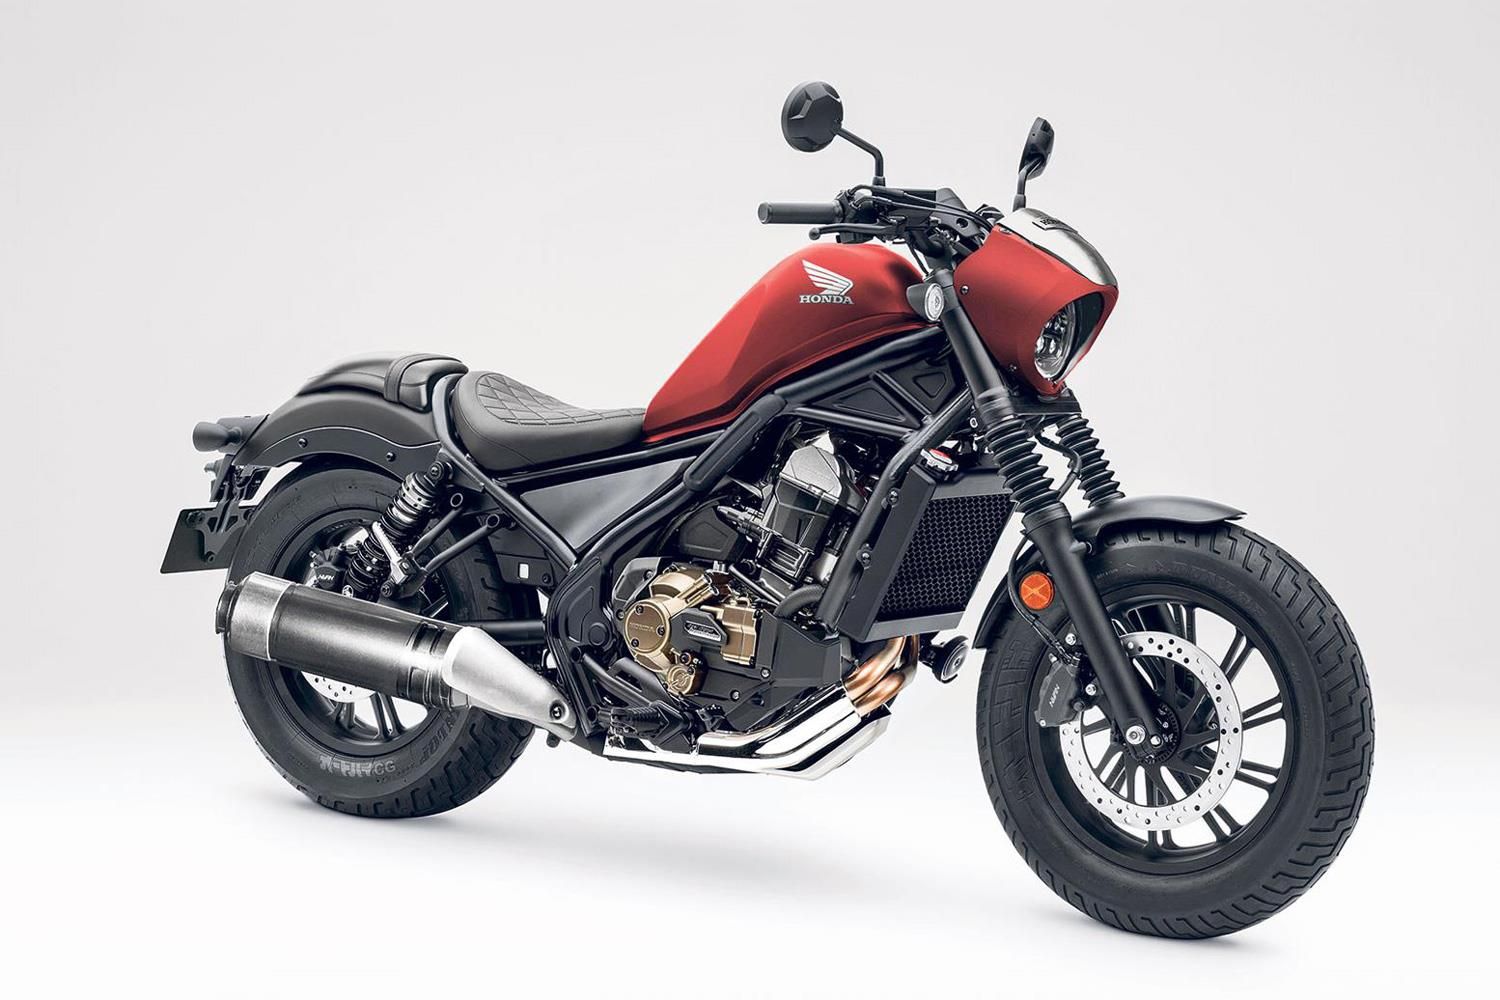 Here's What We Just Learned About The Honda Rebel 1100